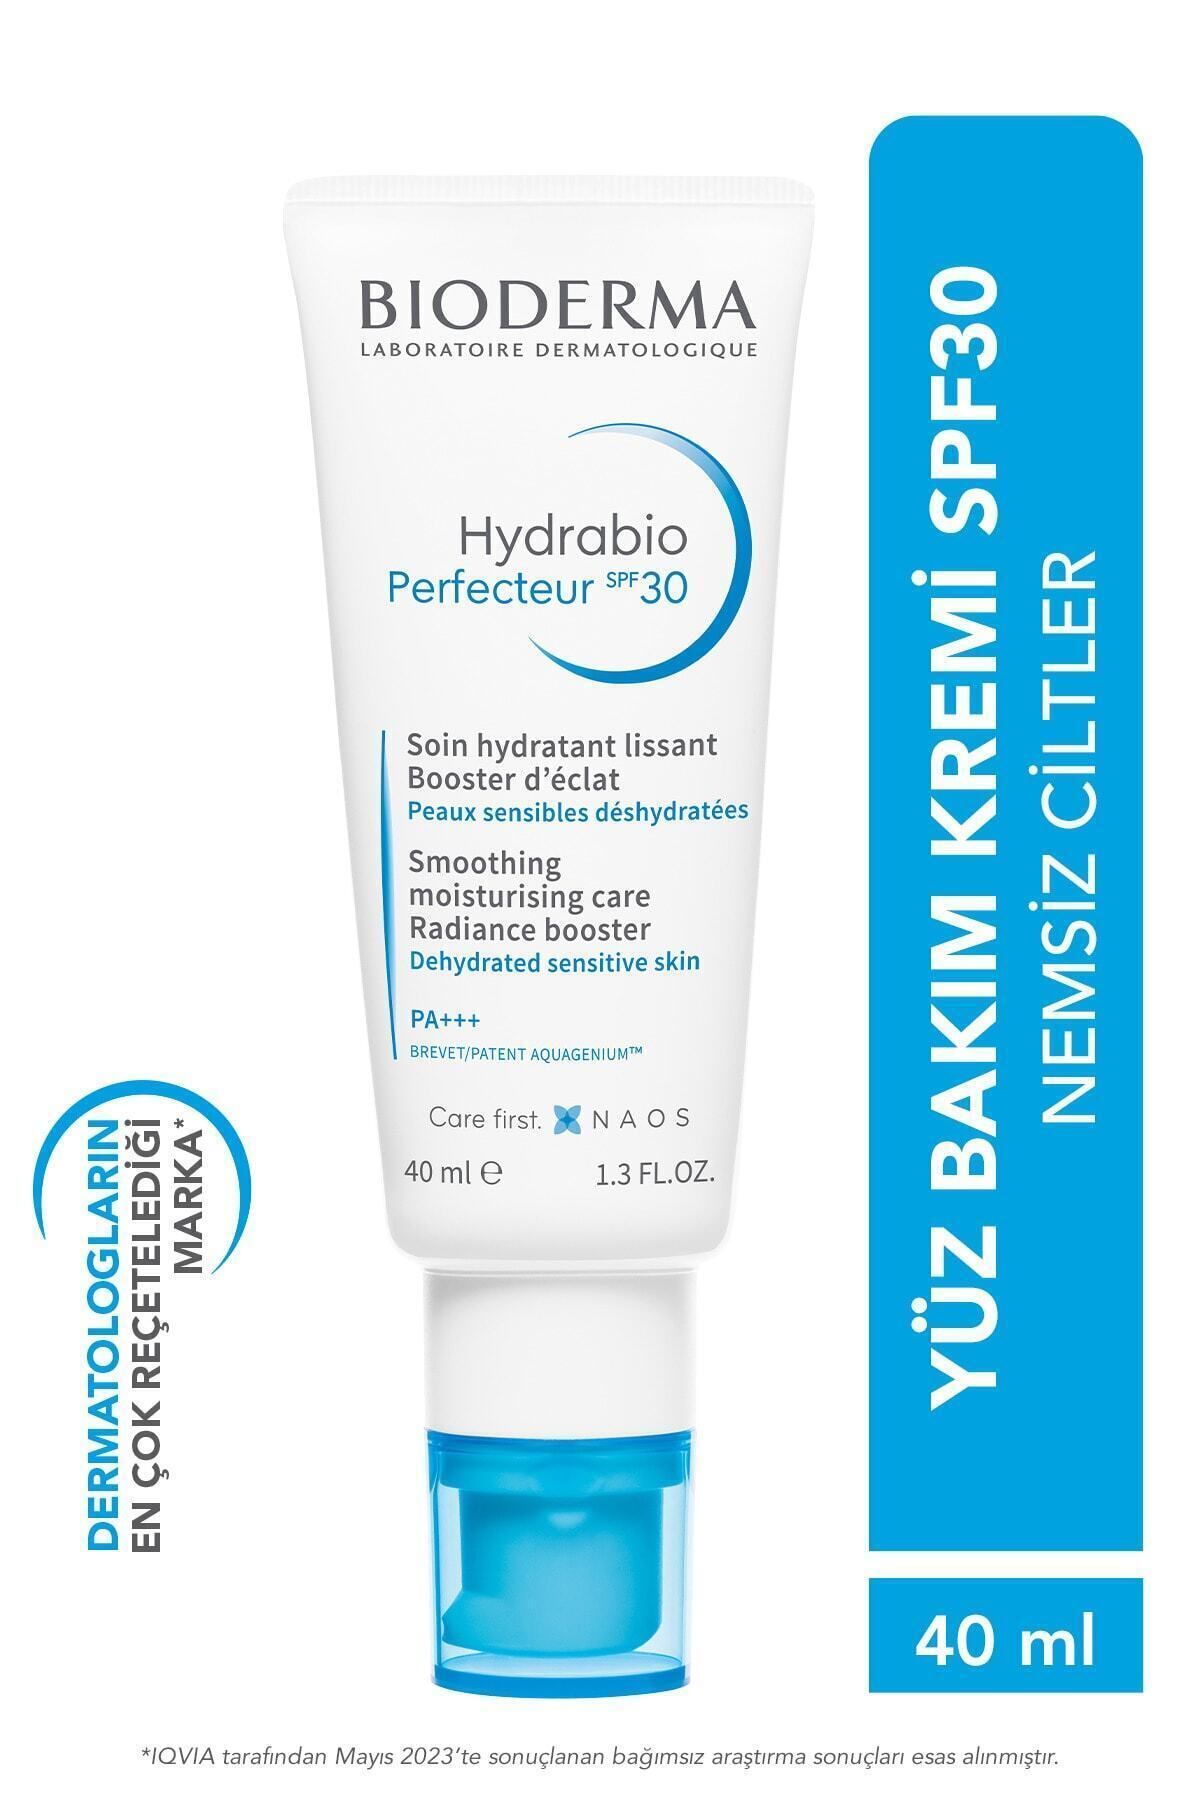 Bioderma PERFECT SKİN -HYDRABİO PERFECTEUR RADİANT SPF30 FACE CREAM WİTH SUNSCREEN 40 ML DMBA267